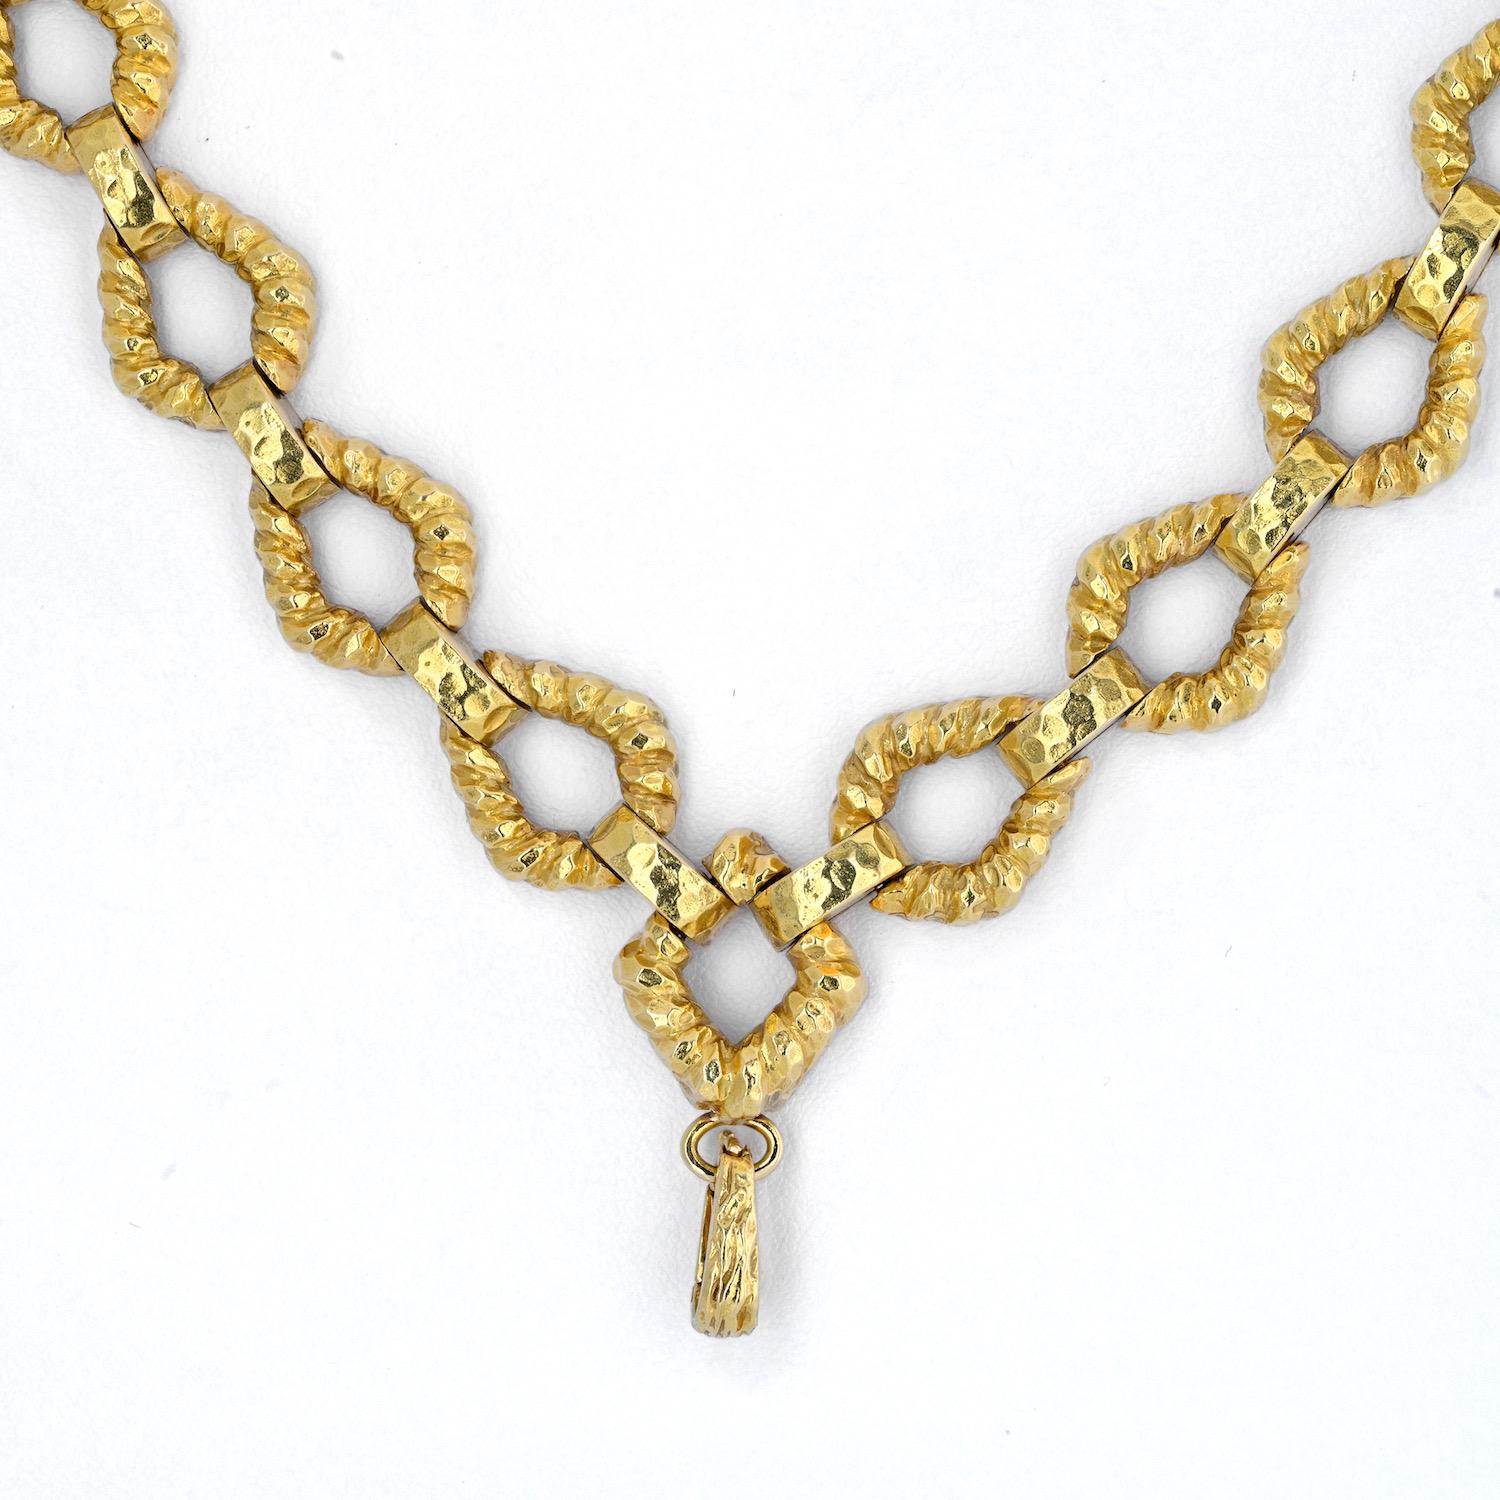 David Webb is known for his signature open link chain necklaces. They are so articulated which makes it easy to distinguish a David Webb necklace from a mile away. This chain necklace is exactly what makes David Webb so desirable and identifiable.